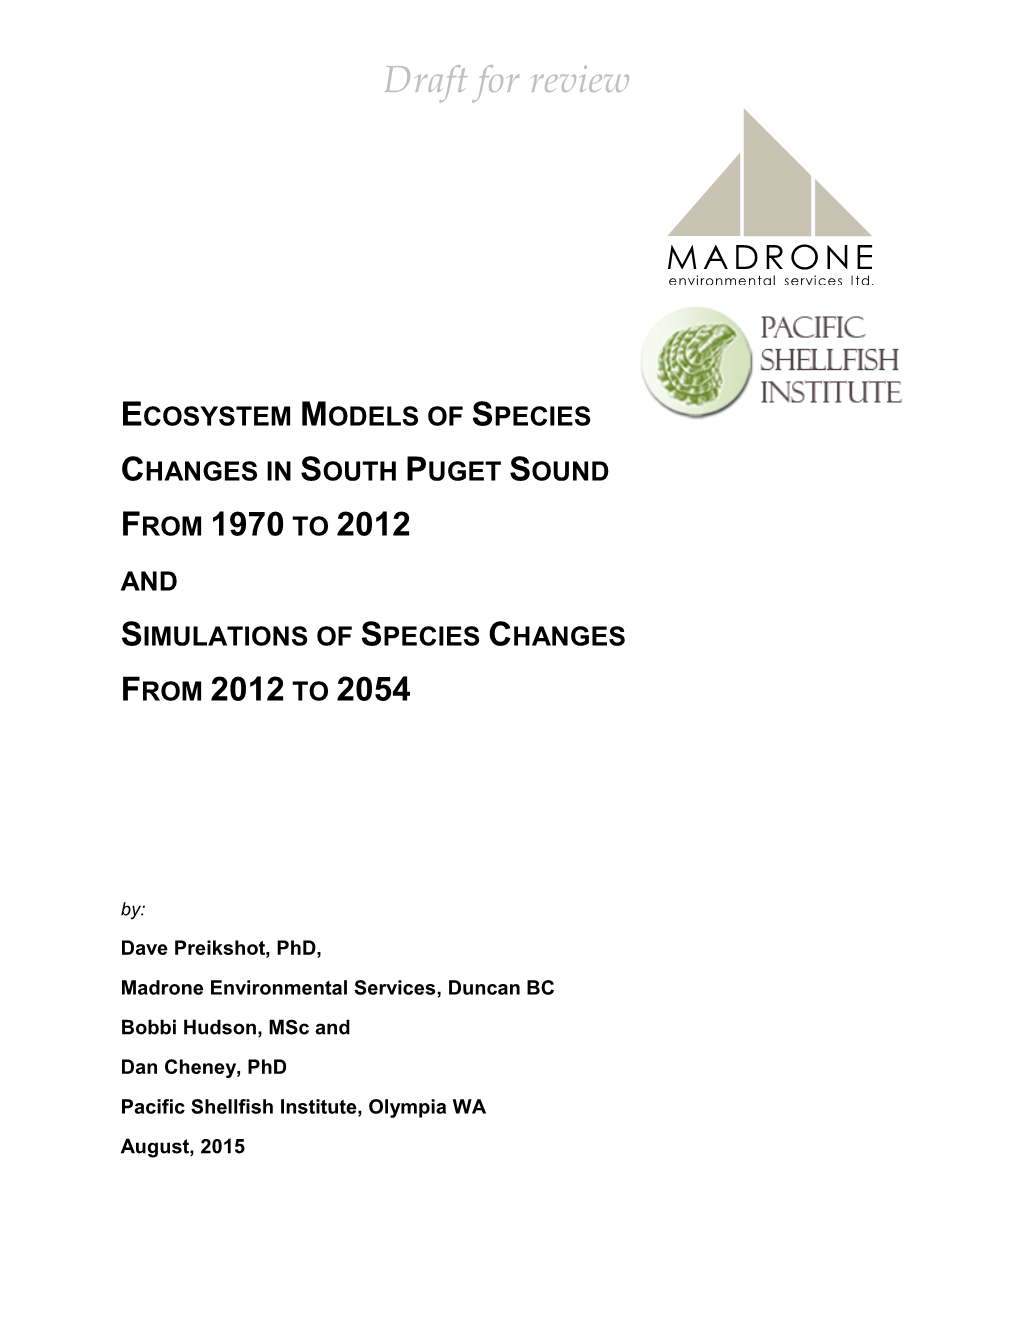 Ecosystem Models of Species Changes in South Puget Sound from 1970 to 2012 and Simulations of Species Changes from 2012 to 2054